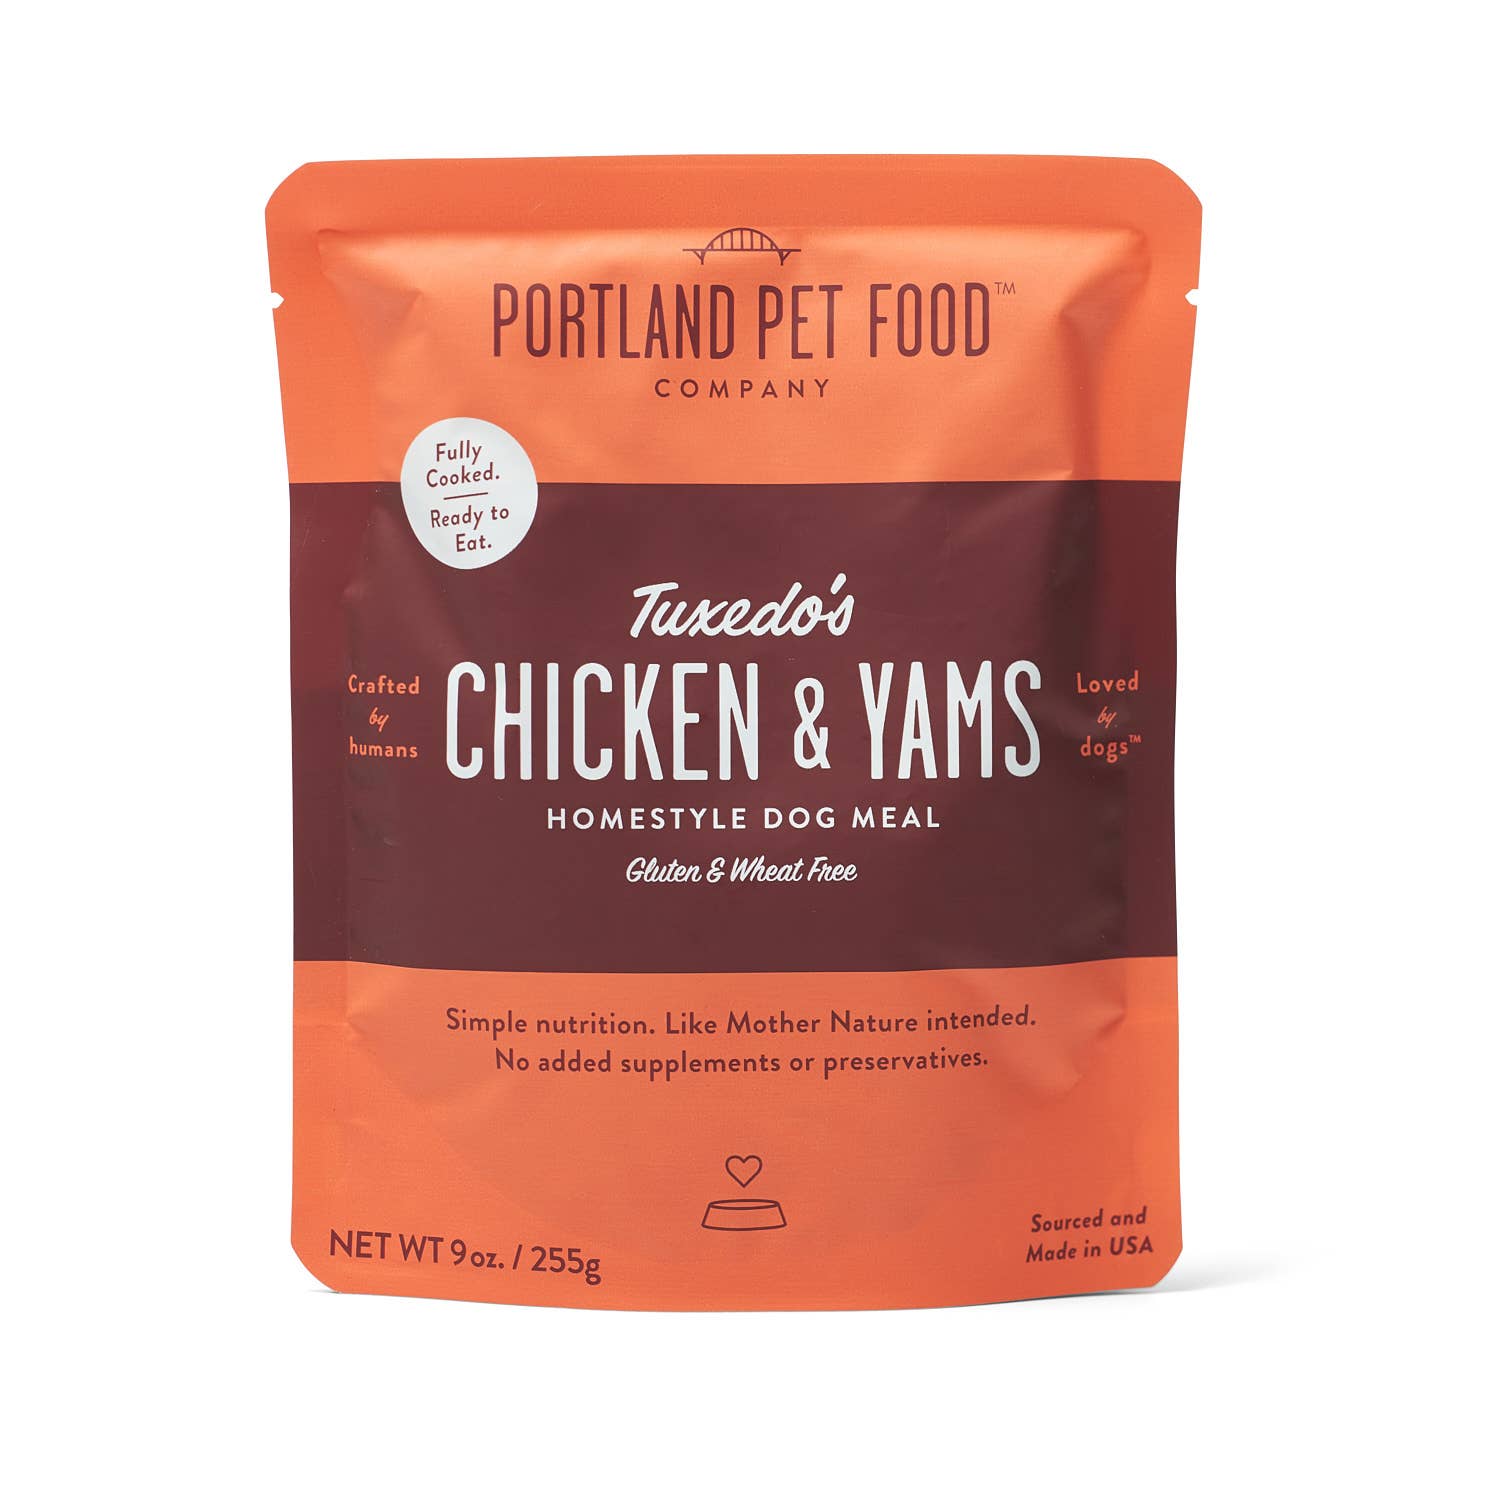 Portland Pet Food Company - Tuxedo's Chicken and Yams Homestyle Dog Meal